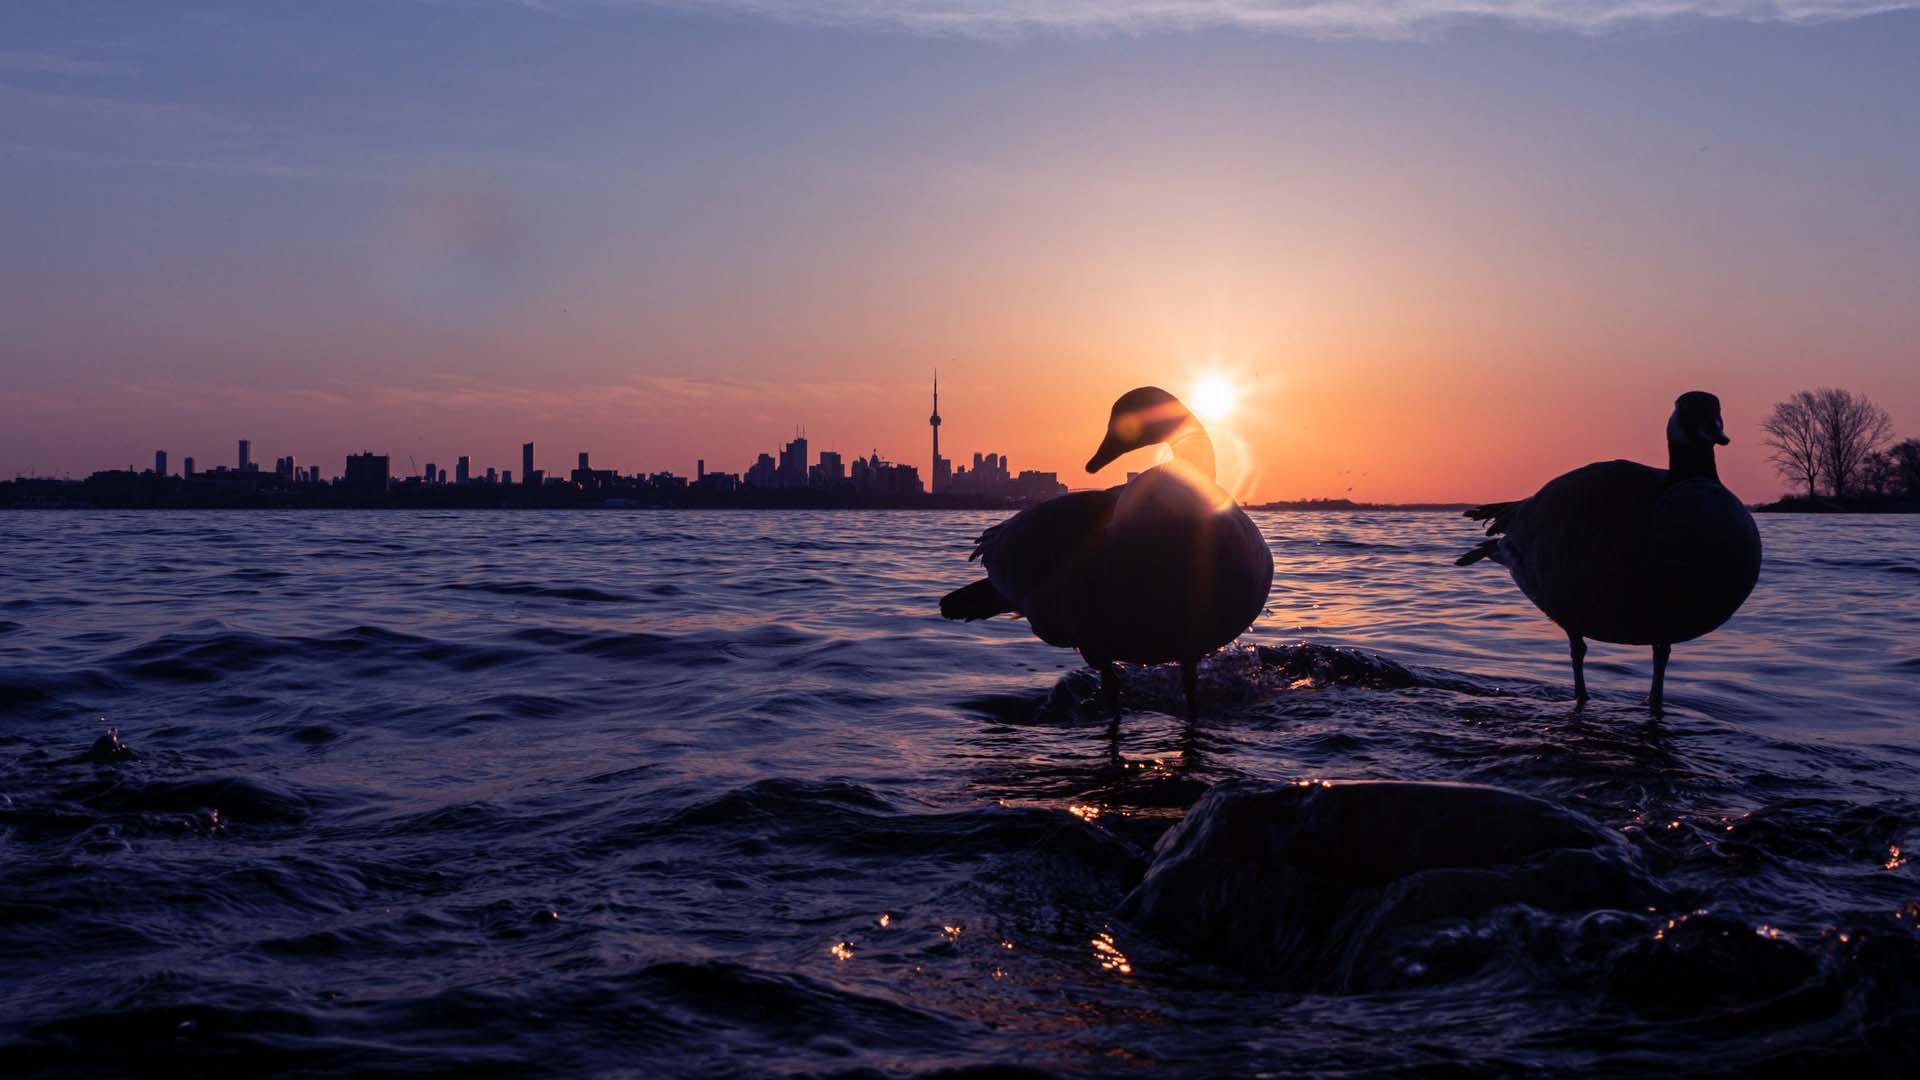 toronto sunset with birds in water